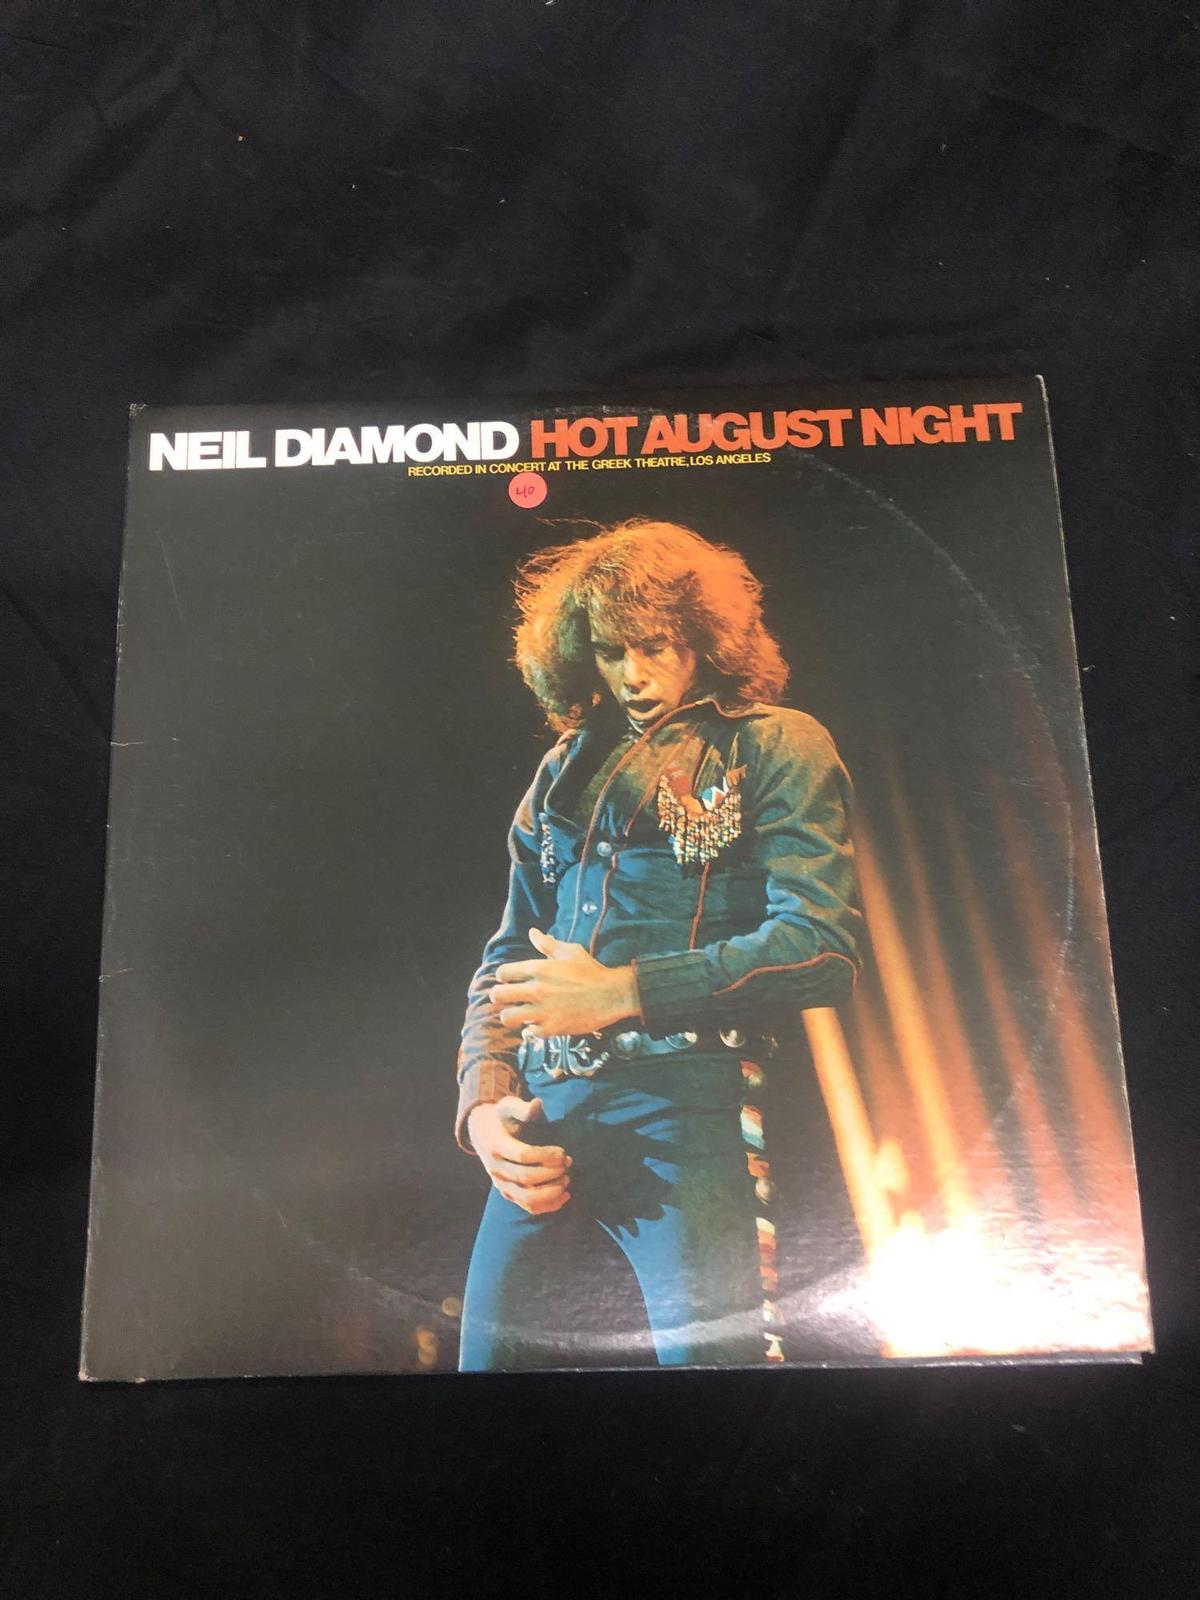 Neil Diamond Hot August Night Vintage Vinyl LP Record from Collection